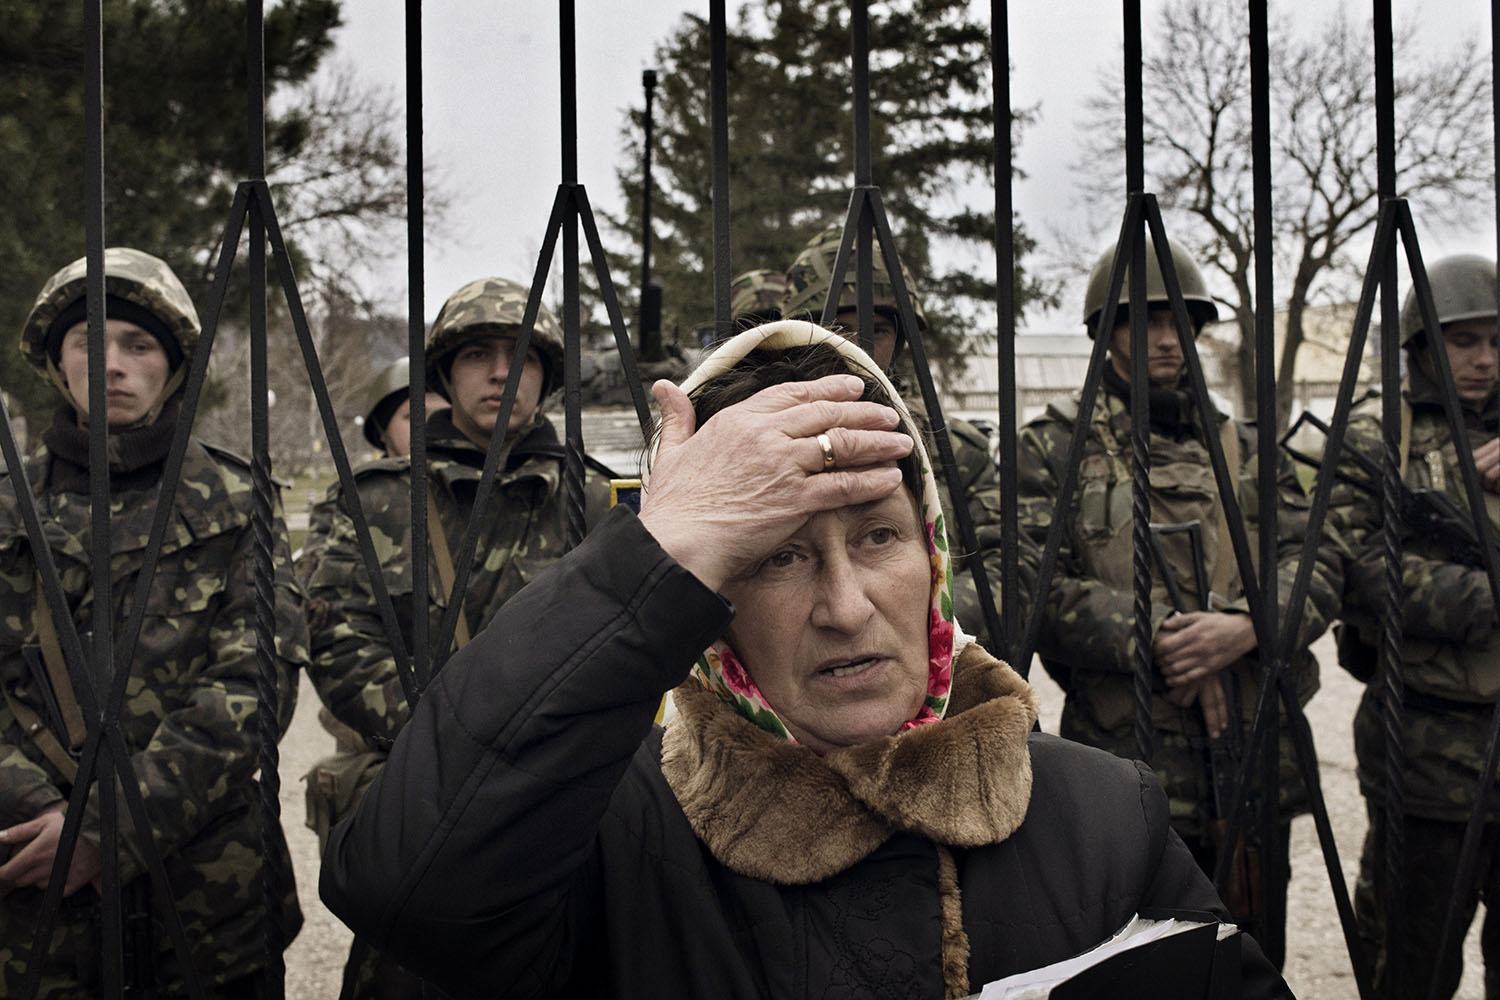 Mar. 2, 2014. A Ukrainian woman reacts as troops in unmarked uniforms  (not pictured) hold positions in Perevalnoye, a small Ukrainian
                              base roughly 15 miles south of Simferopol. About two dozen Ukrainian
                              soldiers stand behind her.